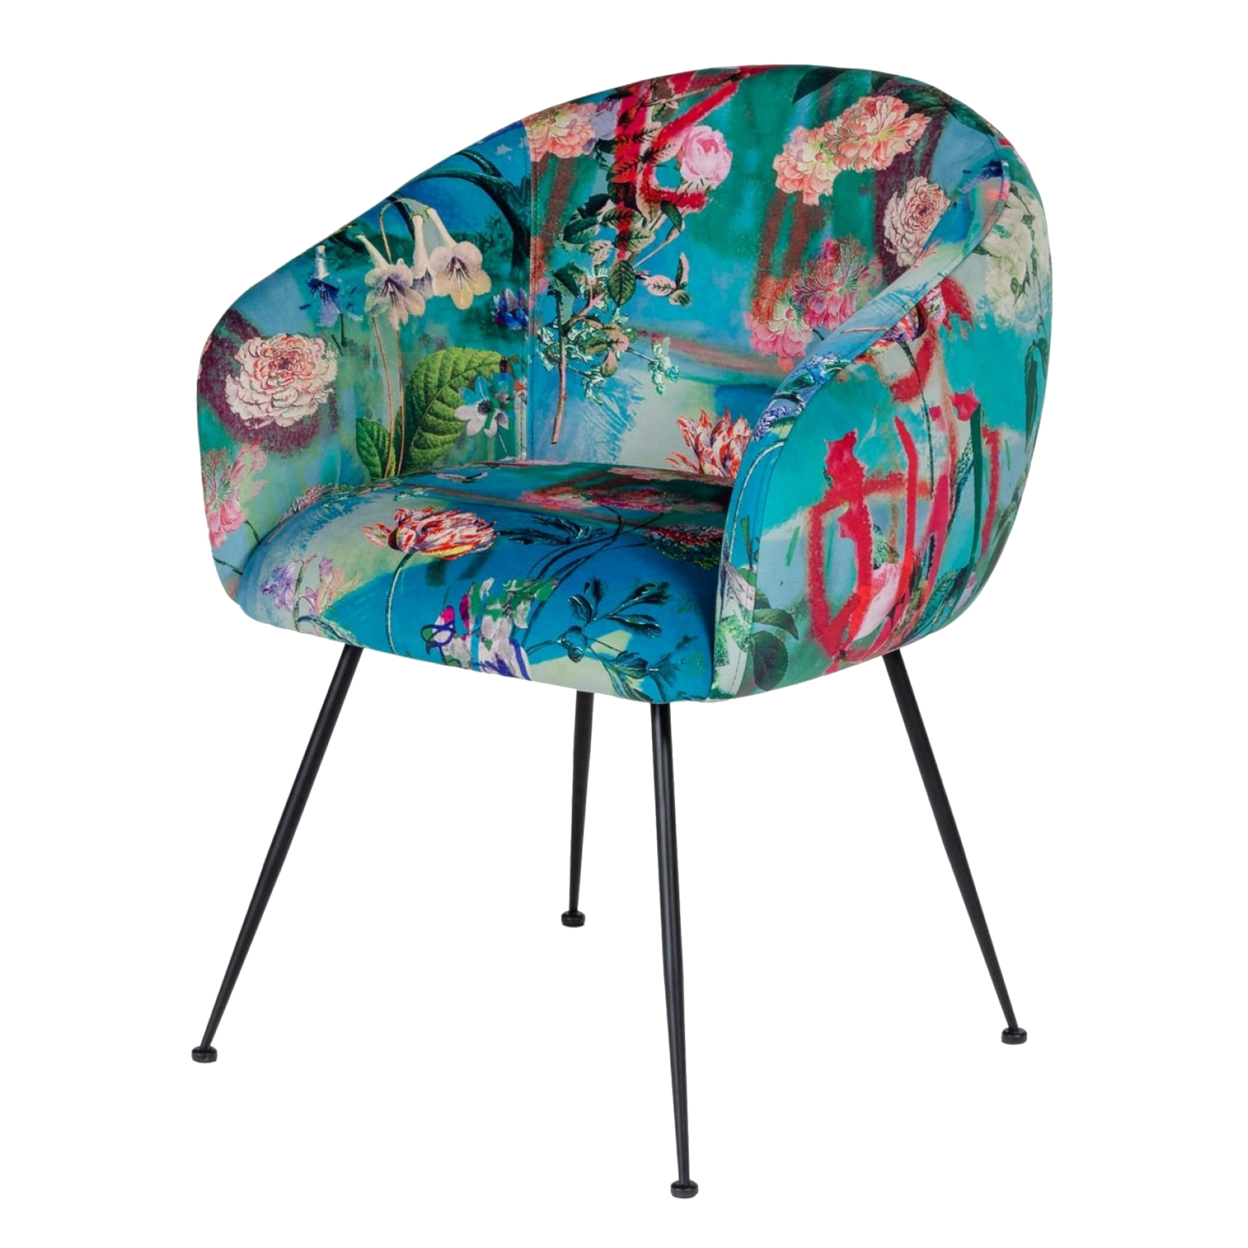 Curved Floral Pattern Fabric Dining Chair With Metal Legs, Blue- Saltoro Sherpi